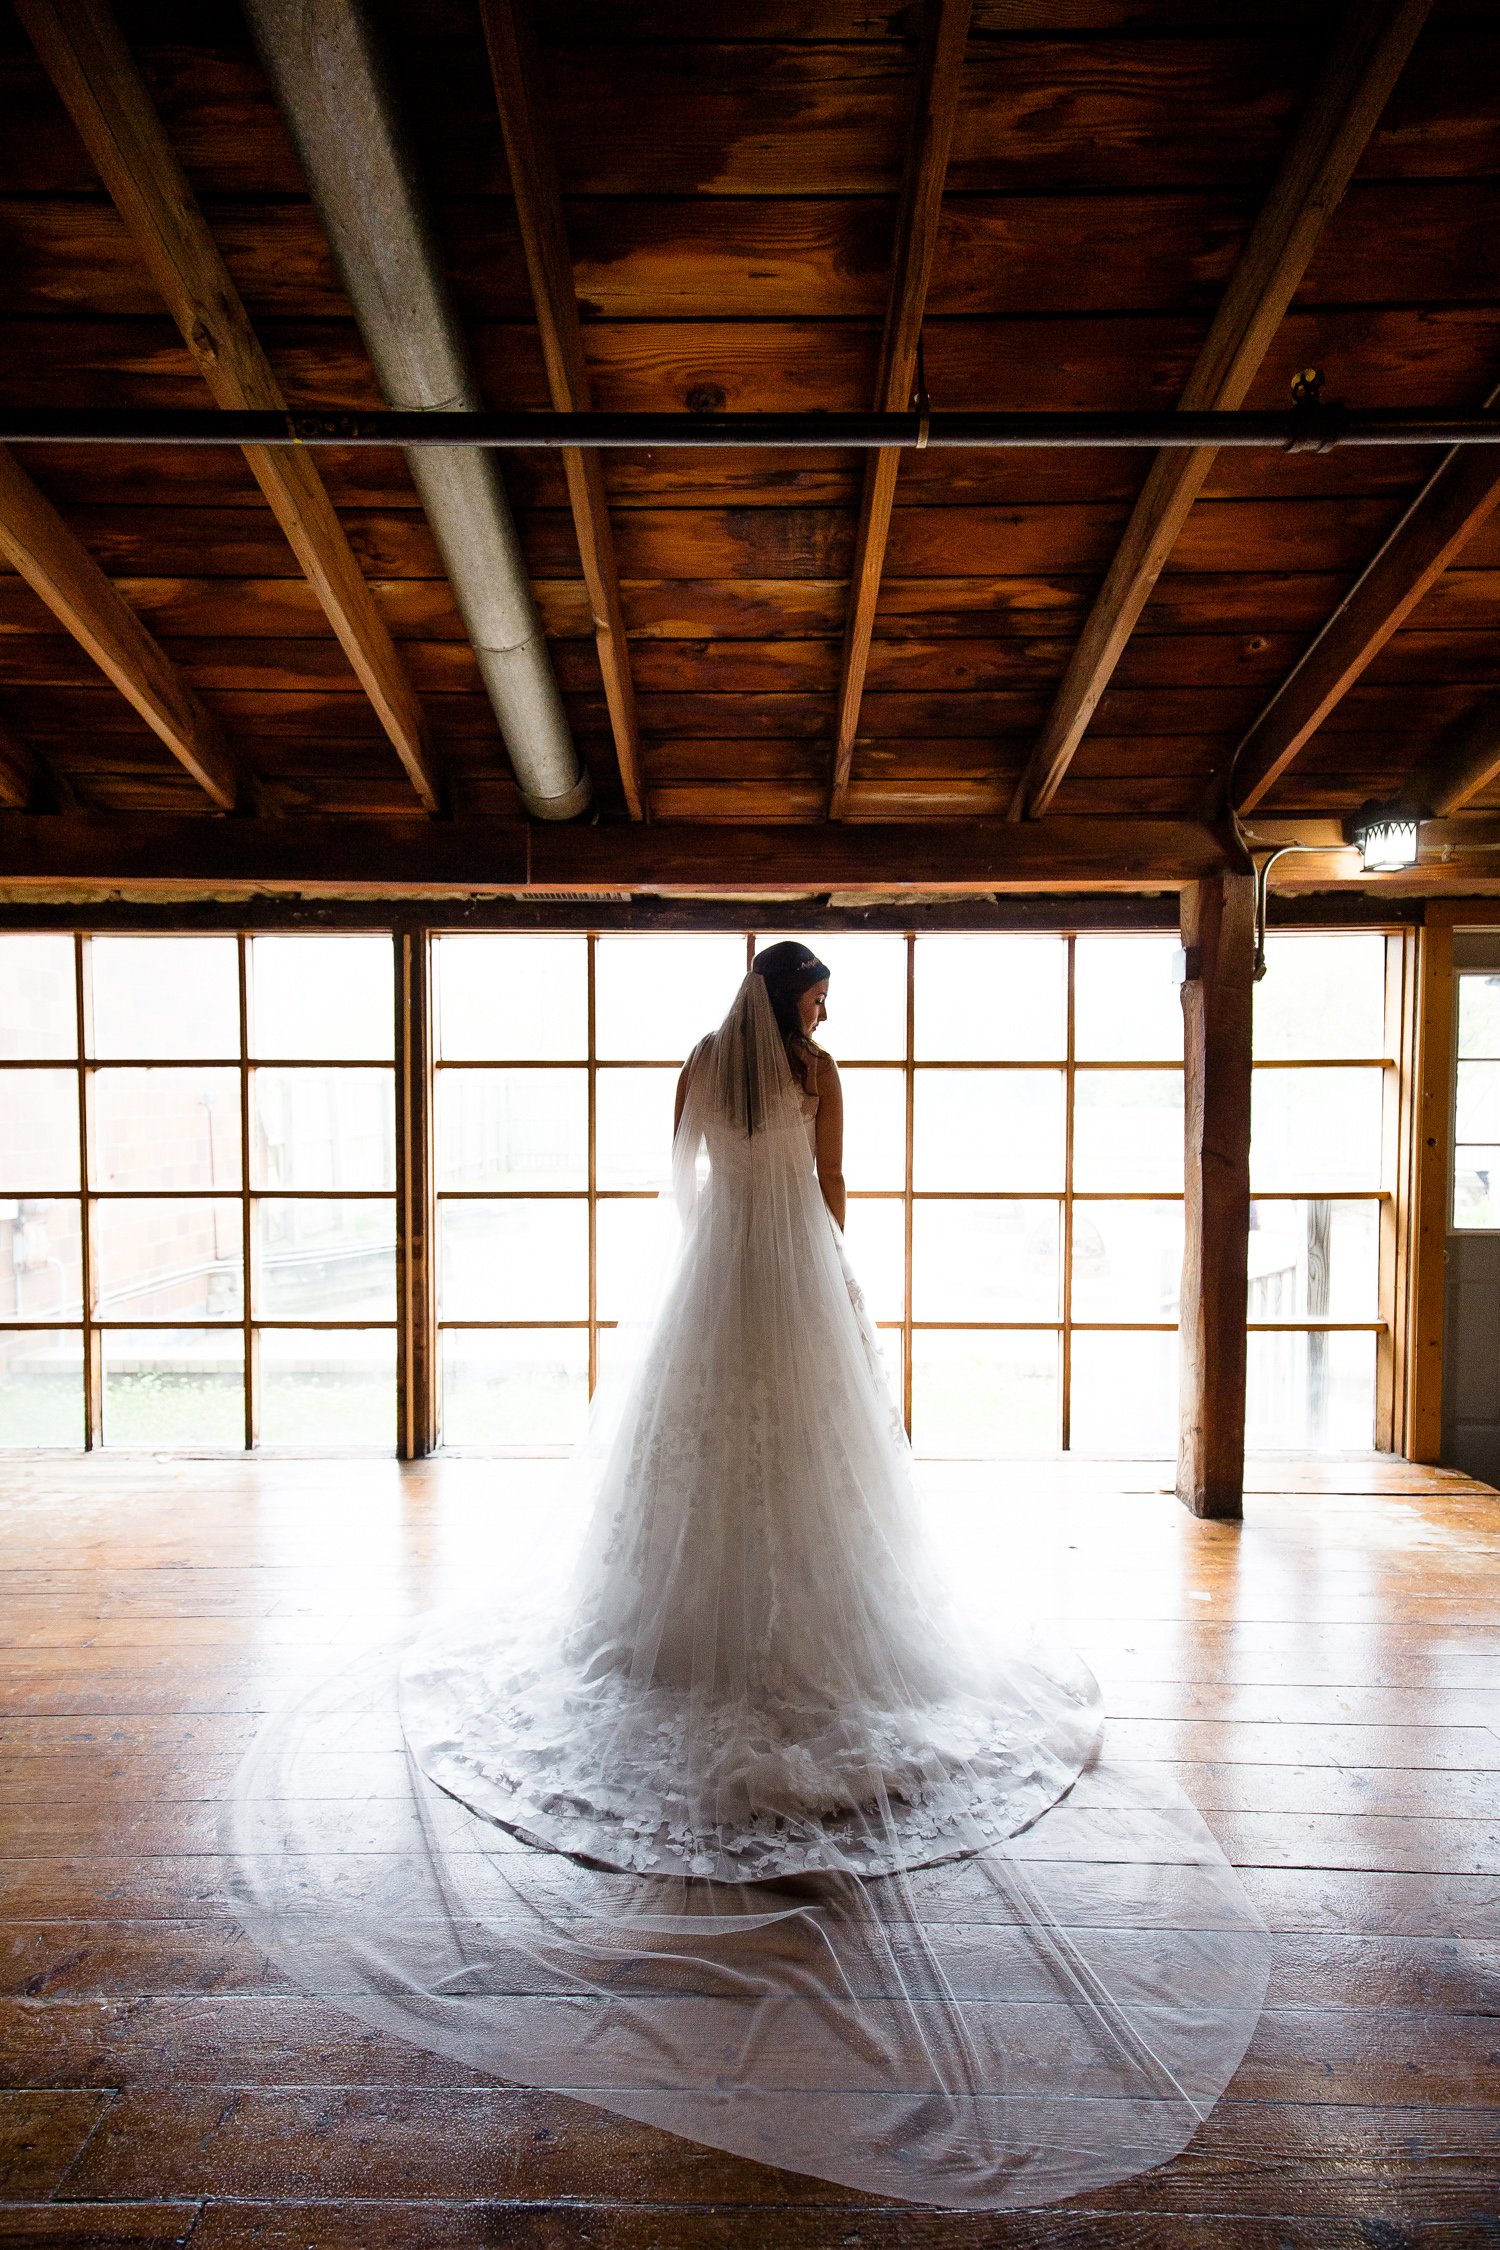 Bride in front of wall of windows